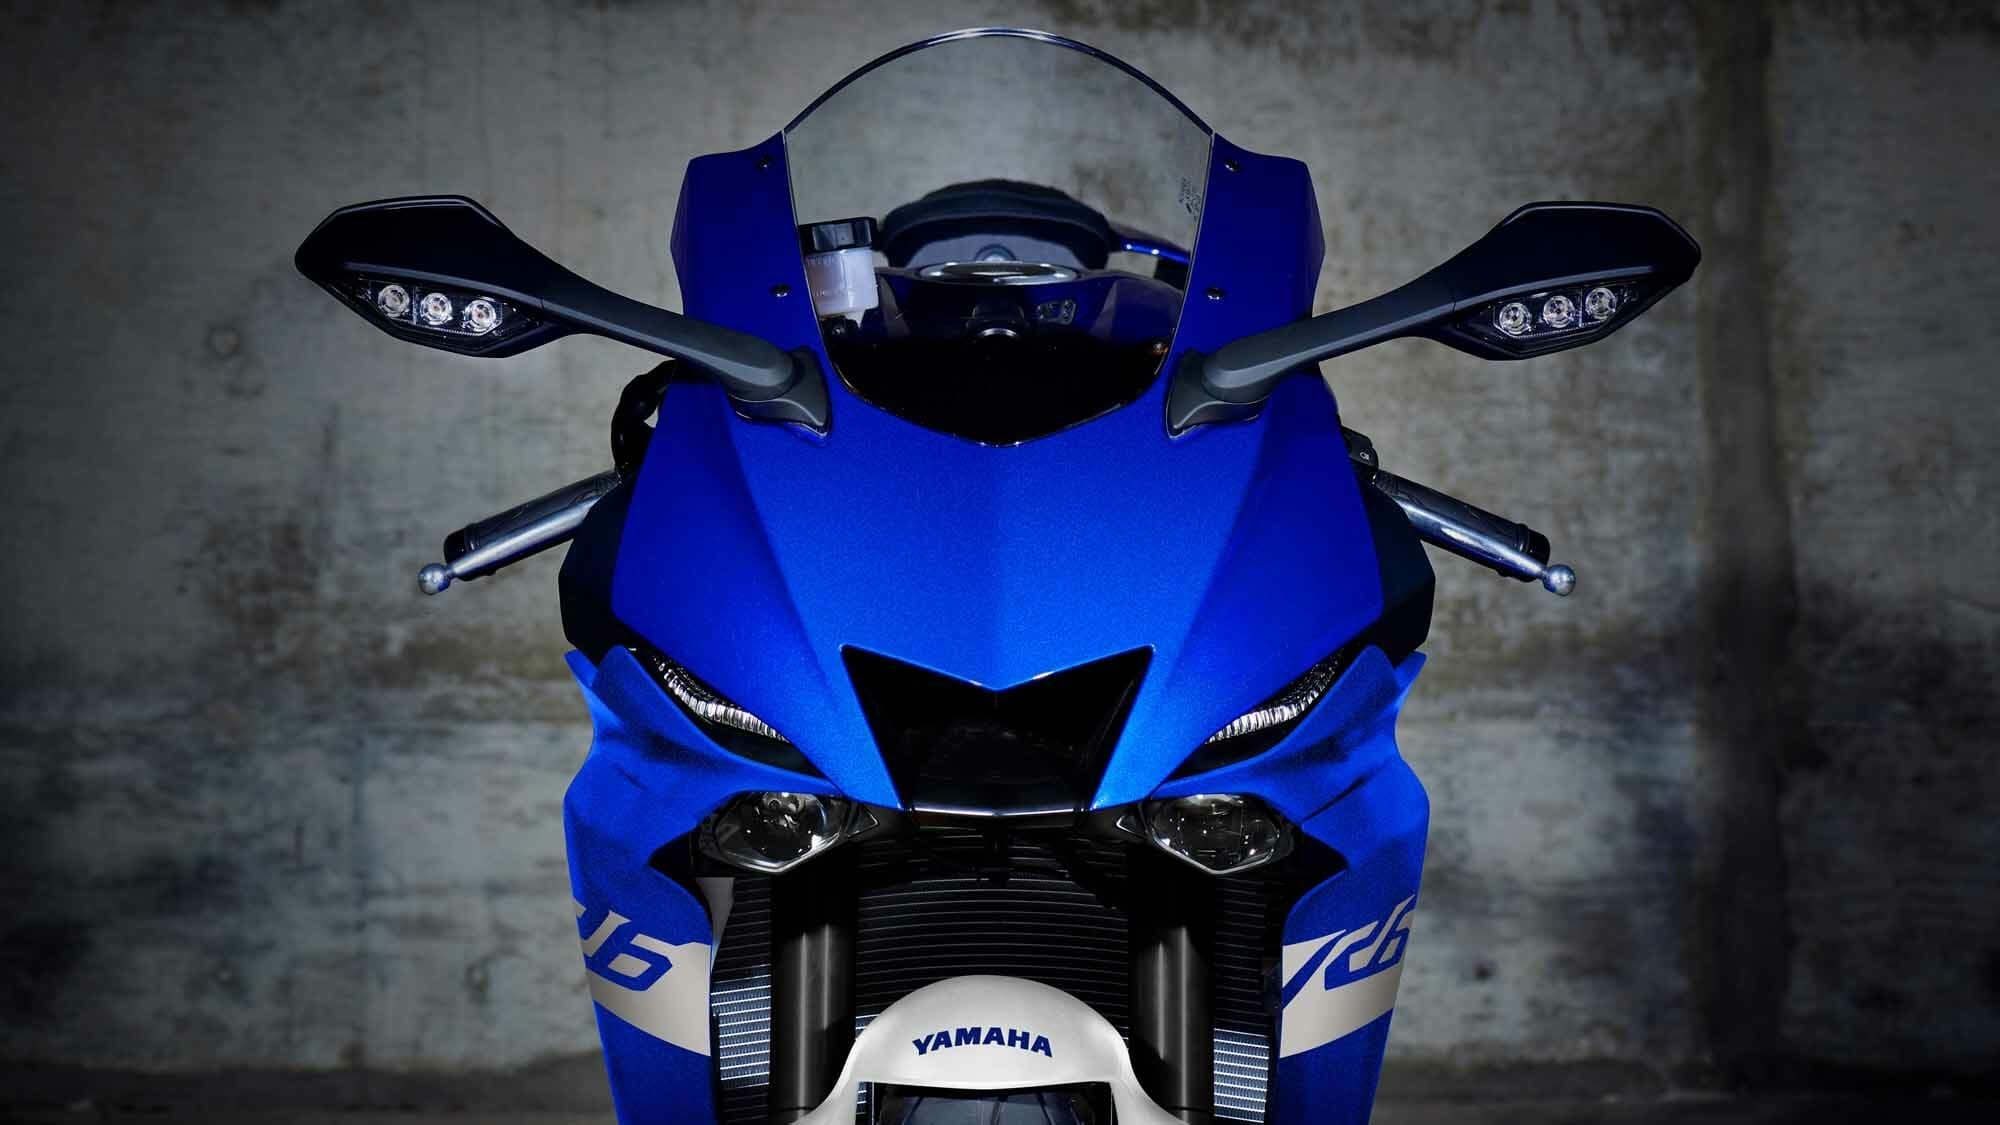 New colors for the Yamaha R family